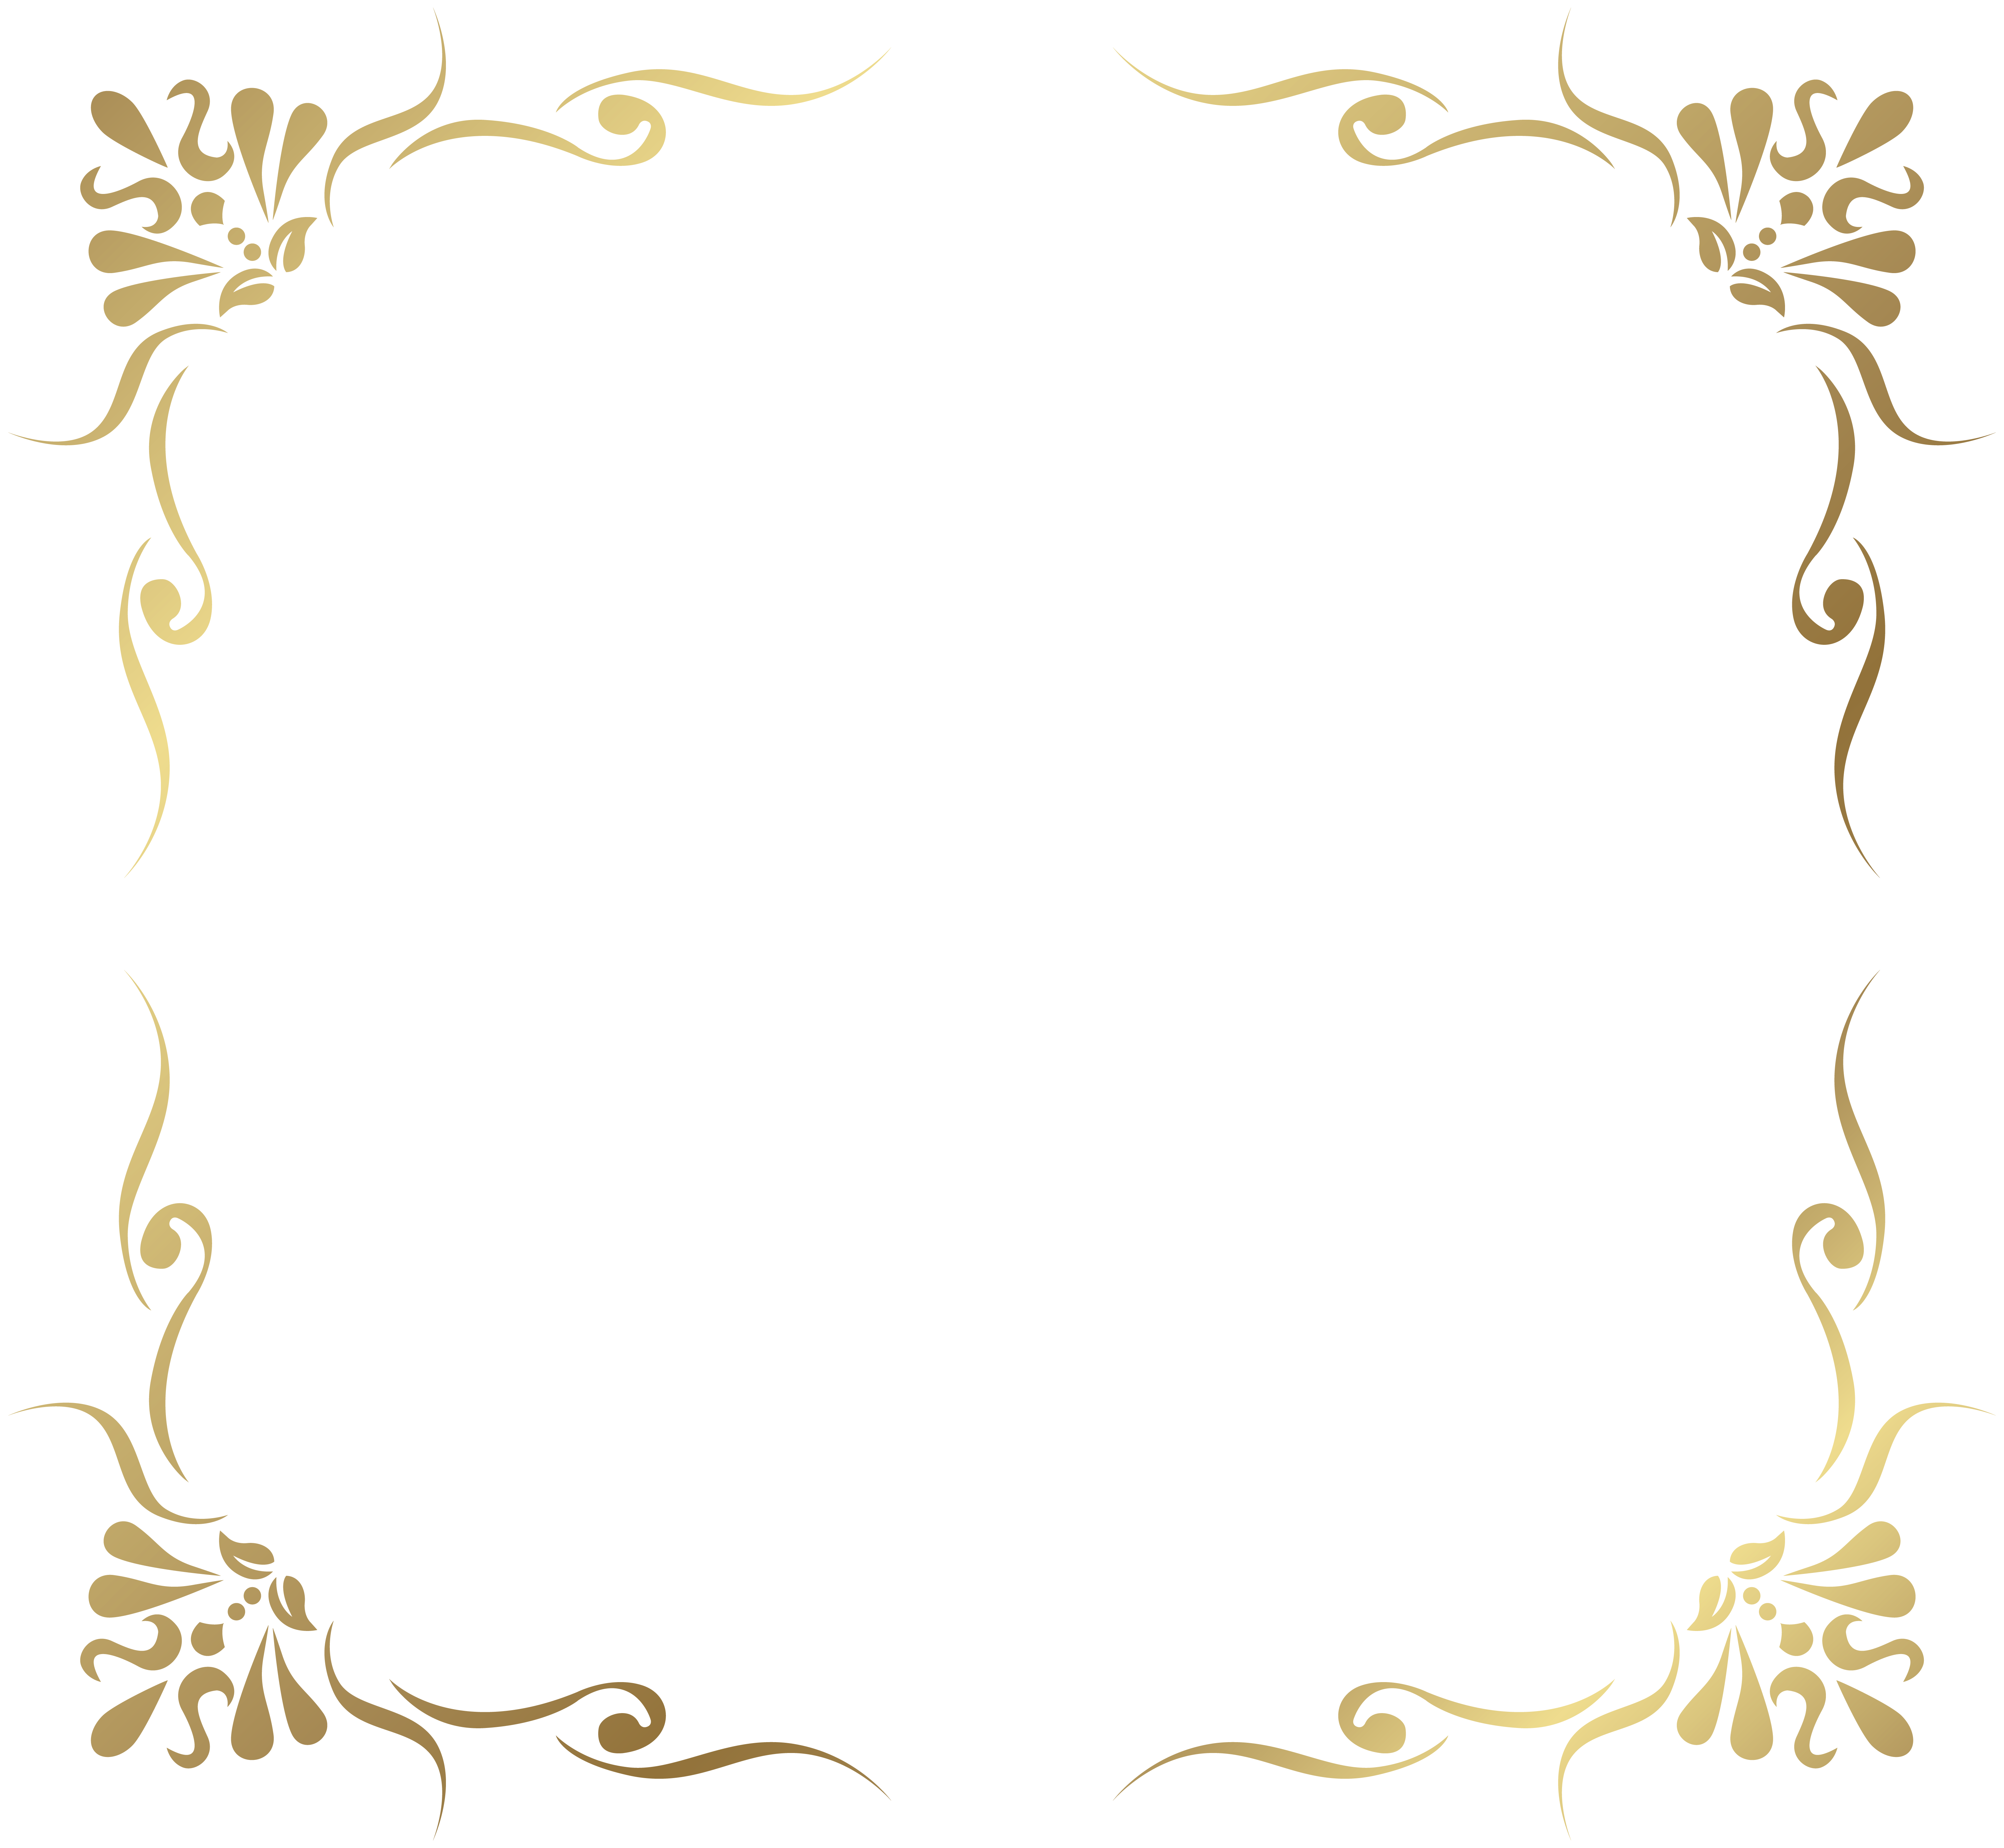 Decorative Picture Frame Border Transparent PNG Image High Quality Clipart